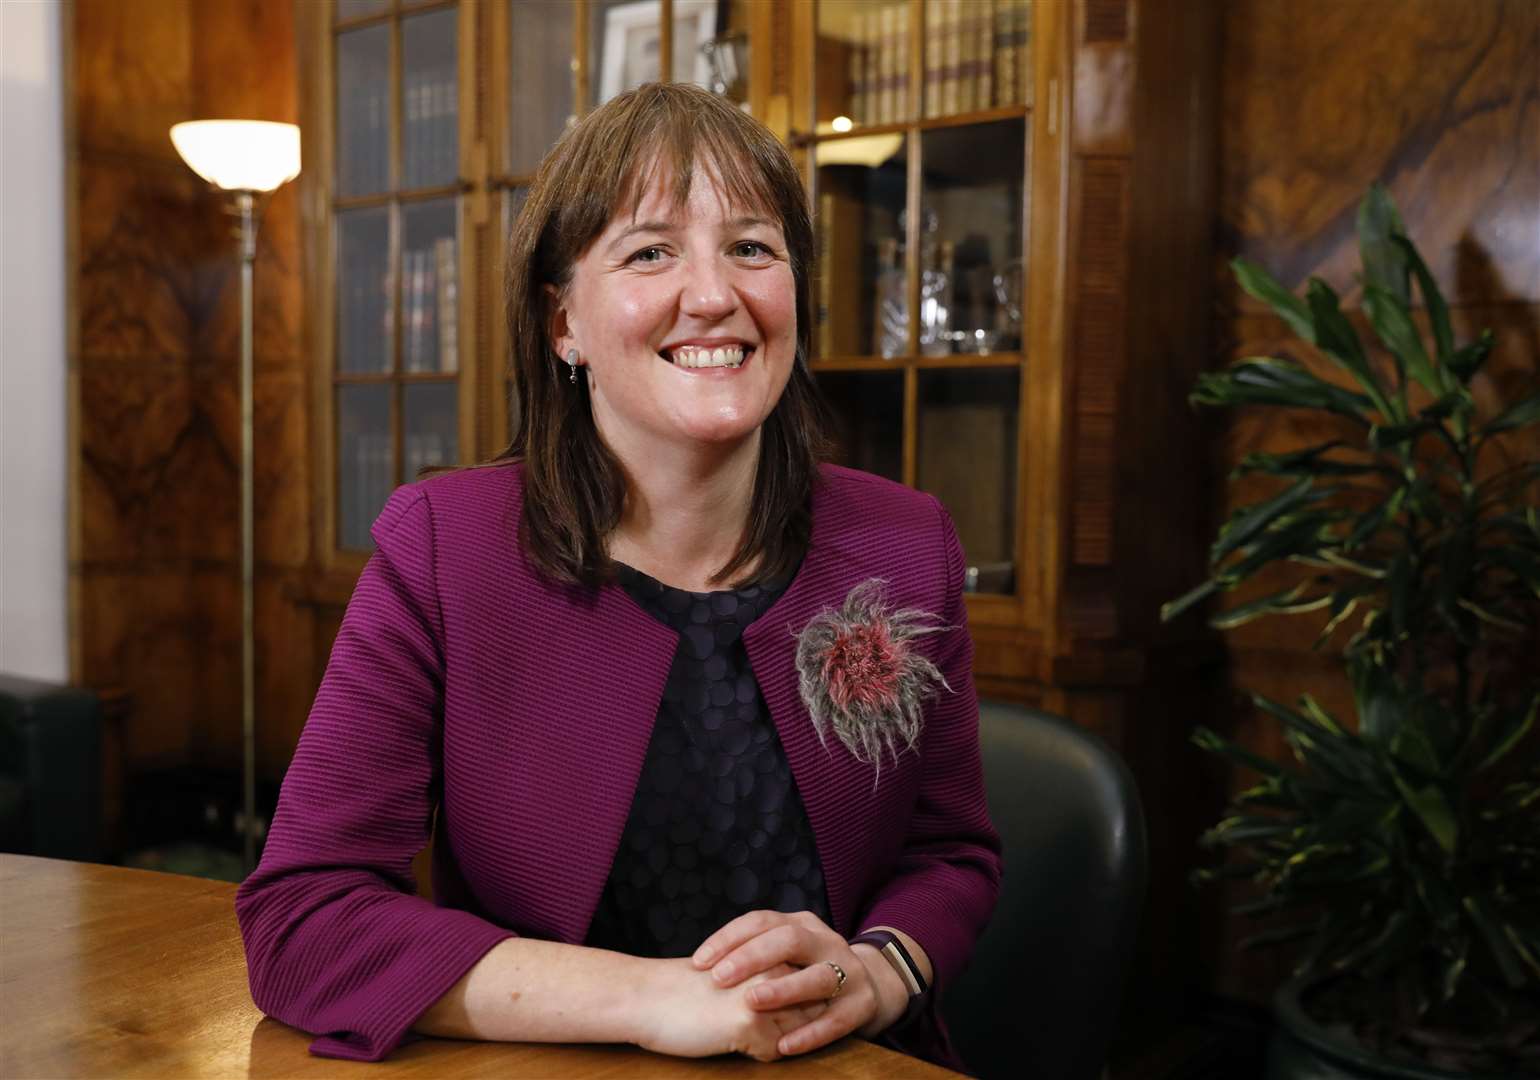 Maree Todd, the minister for children and young people, has rejected claims by Highland Council’s finance boss.